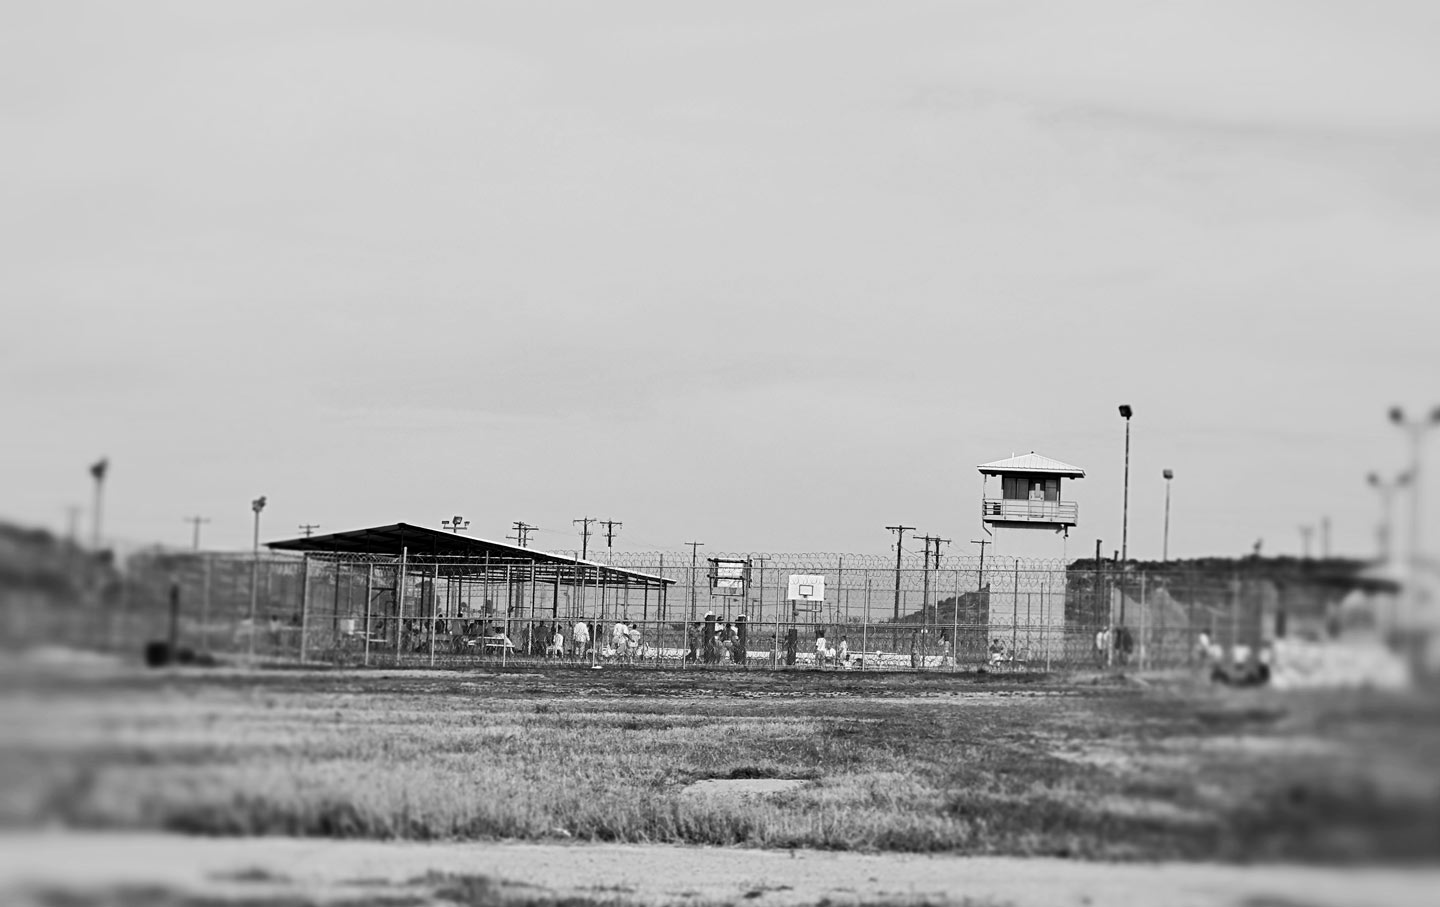 Family Sues Private-Prison Operator Over Deaths at Immigrant-Only Facilities